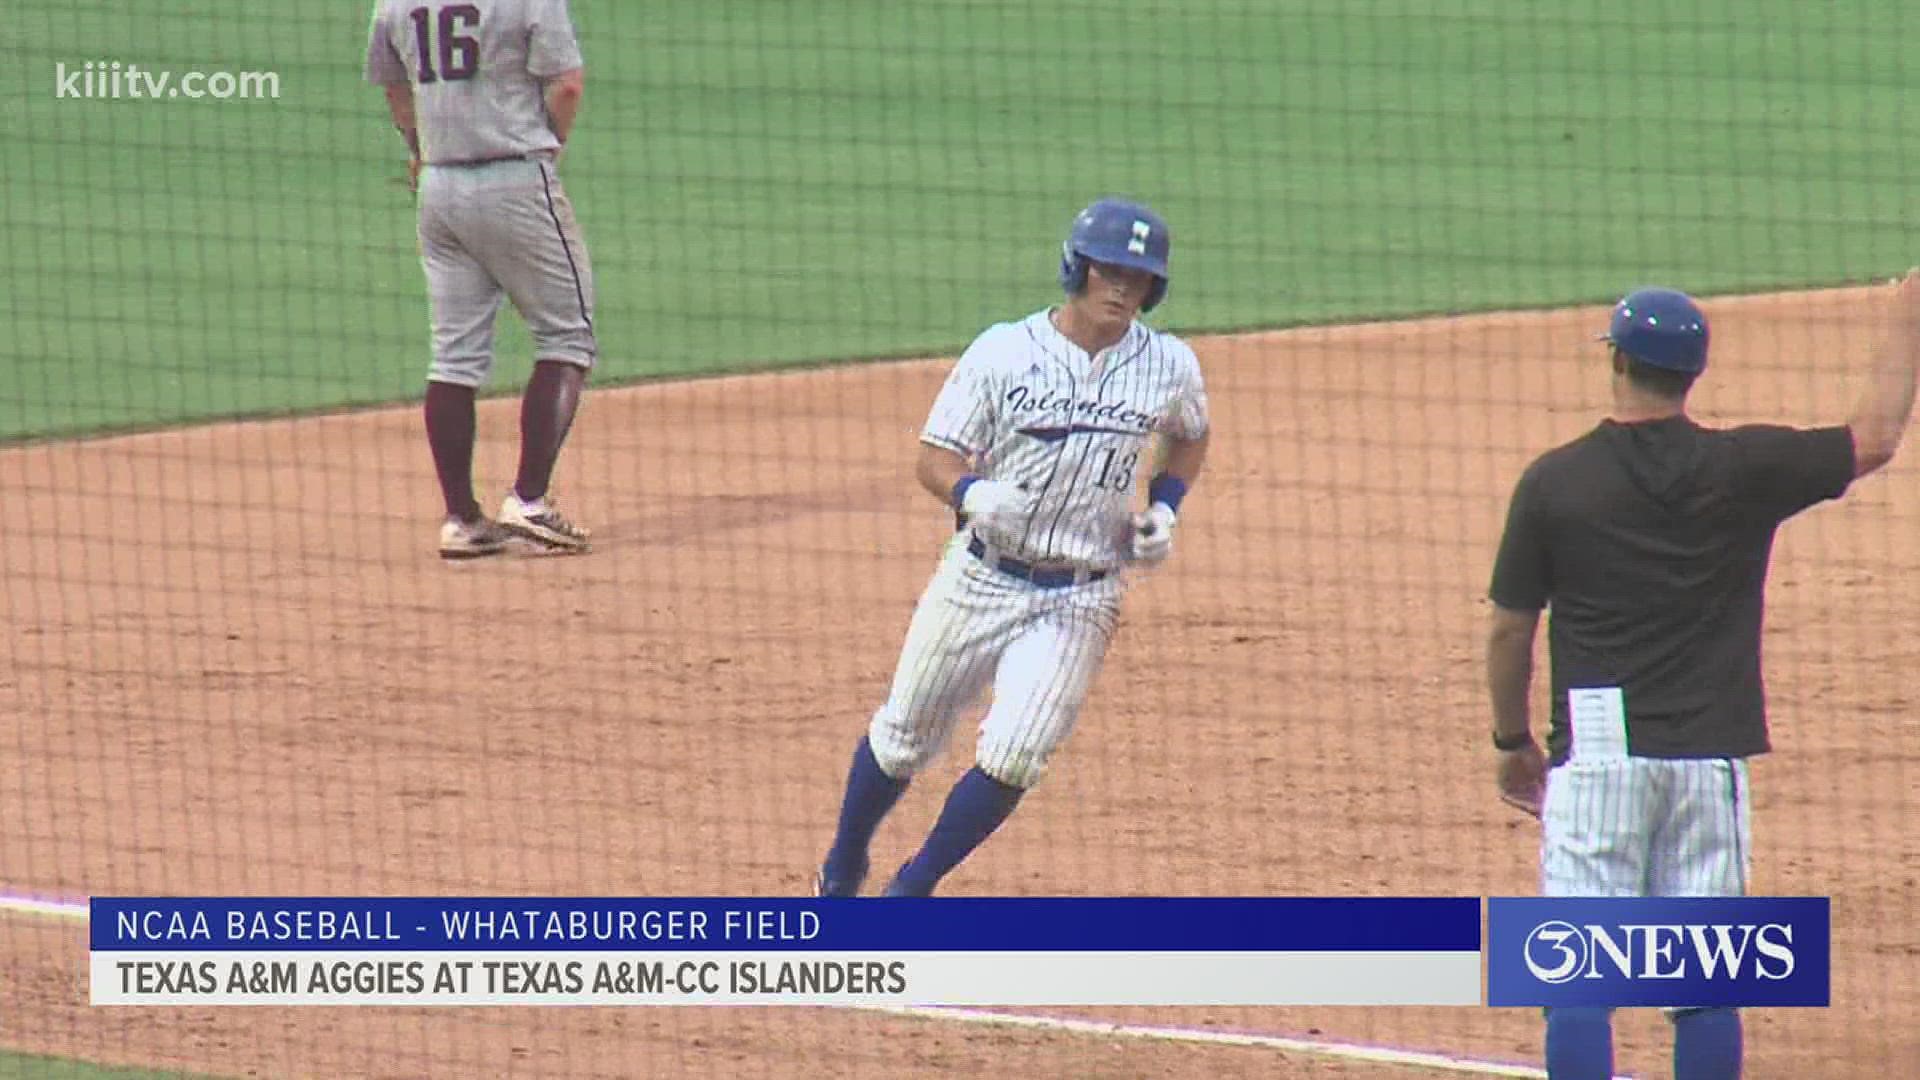 Texas A&M-CC got a two-run HR from Josh Caraway in a loss to Texas A&M Tuesday.